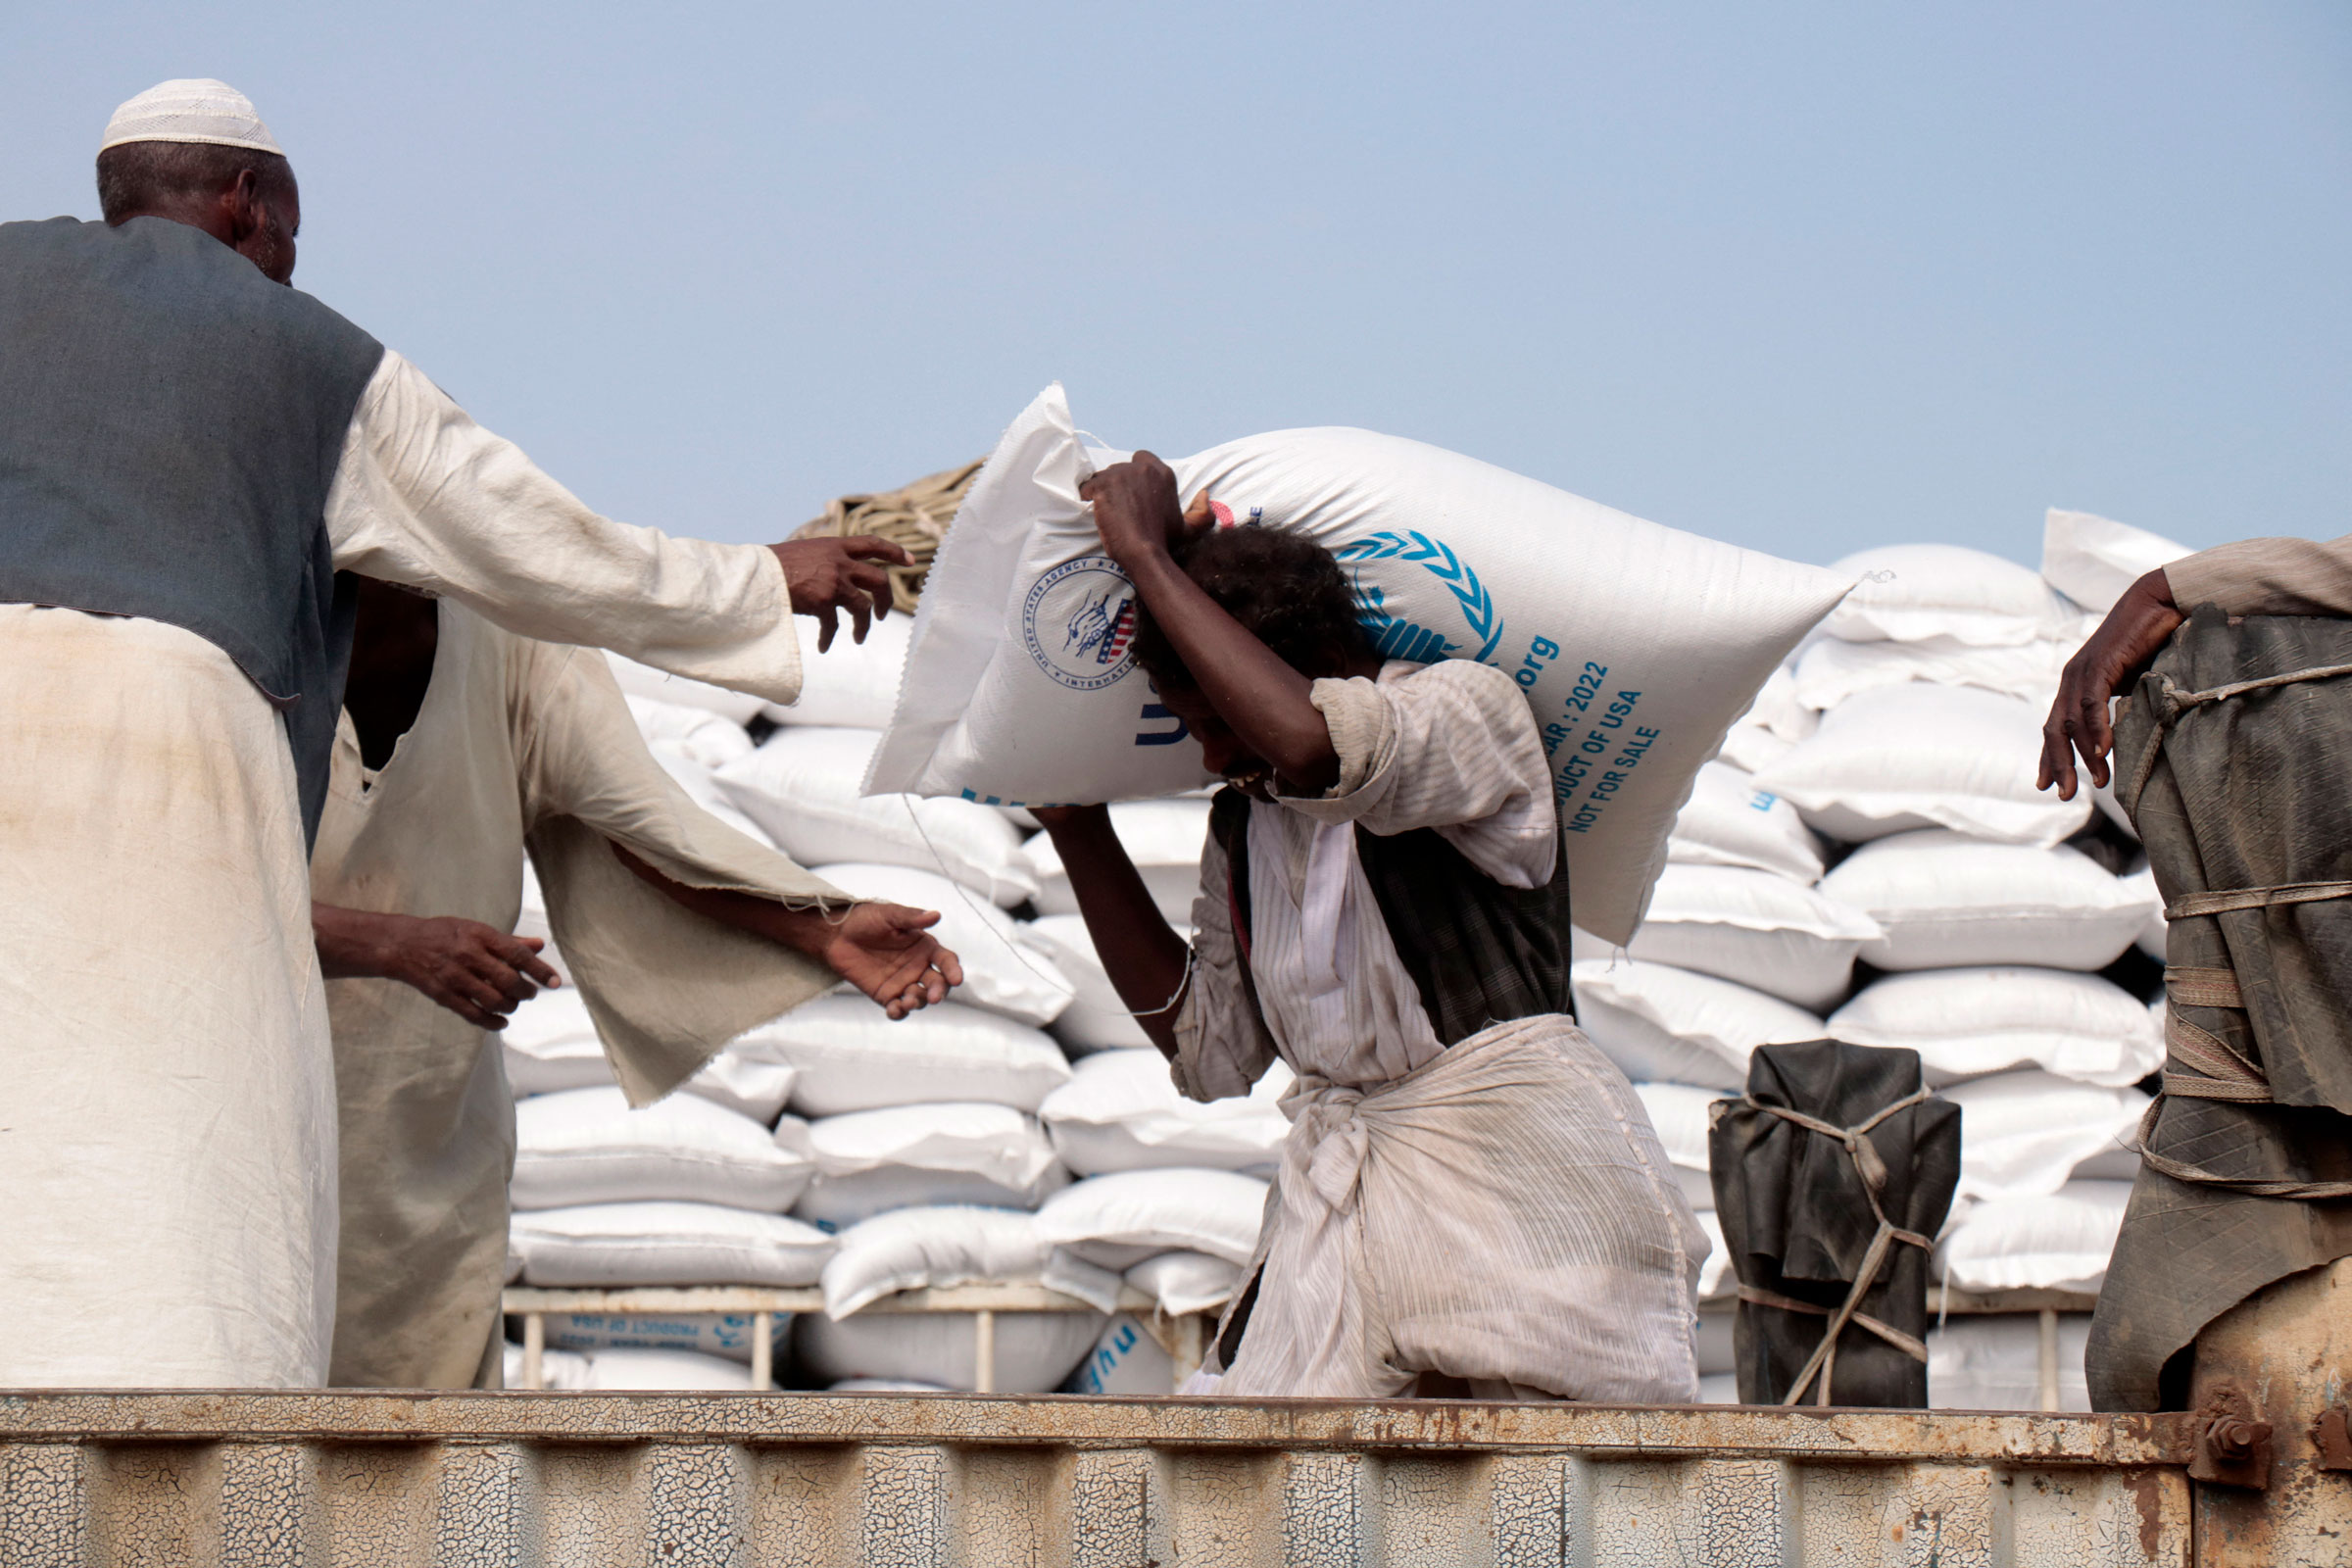 Sacs of corn are loaded onto trucks in the Sudanese Red Sea city of Port Sudan, as part of the US support for Sudan in the field of humanitarian aid, on Nov. 20, 2022. (AFP/Getty Images)